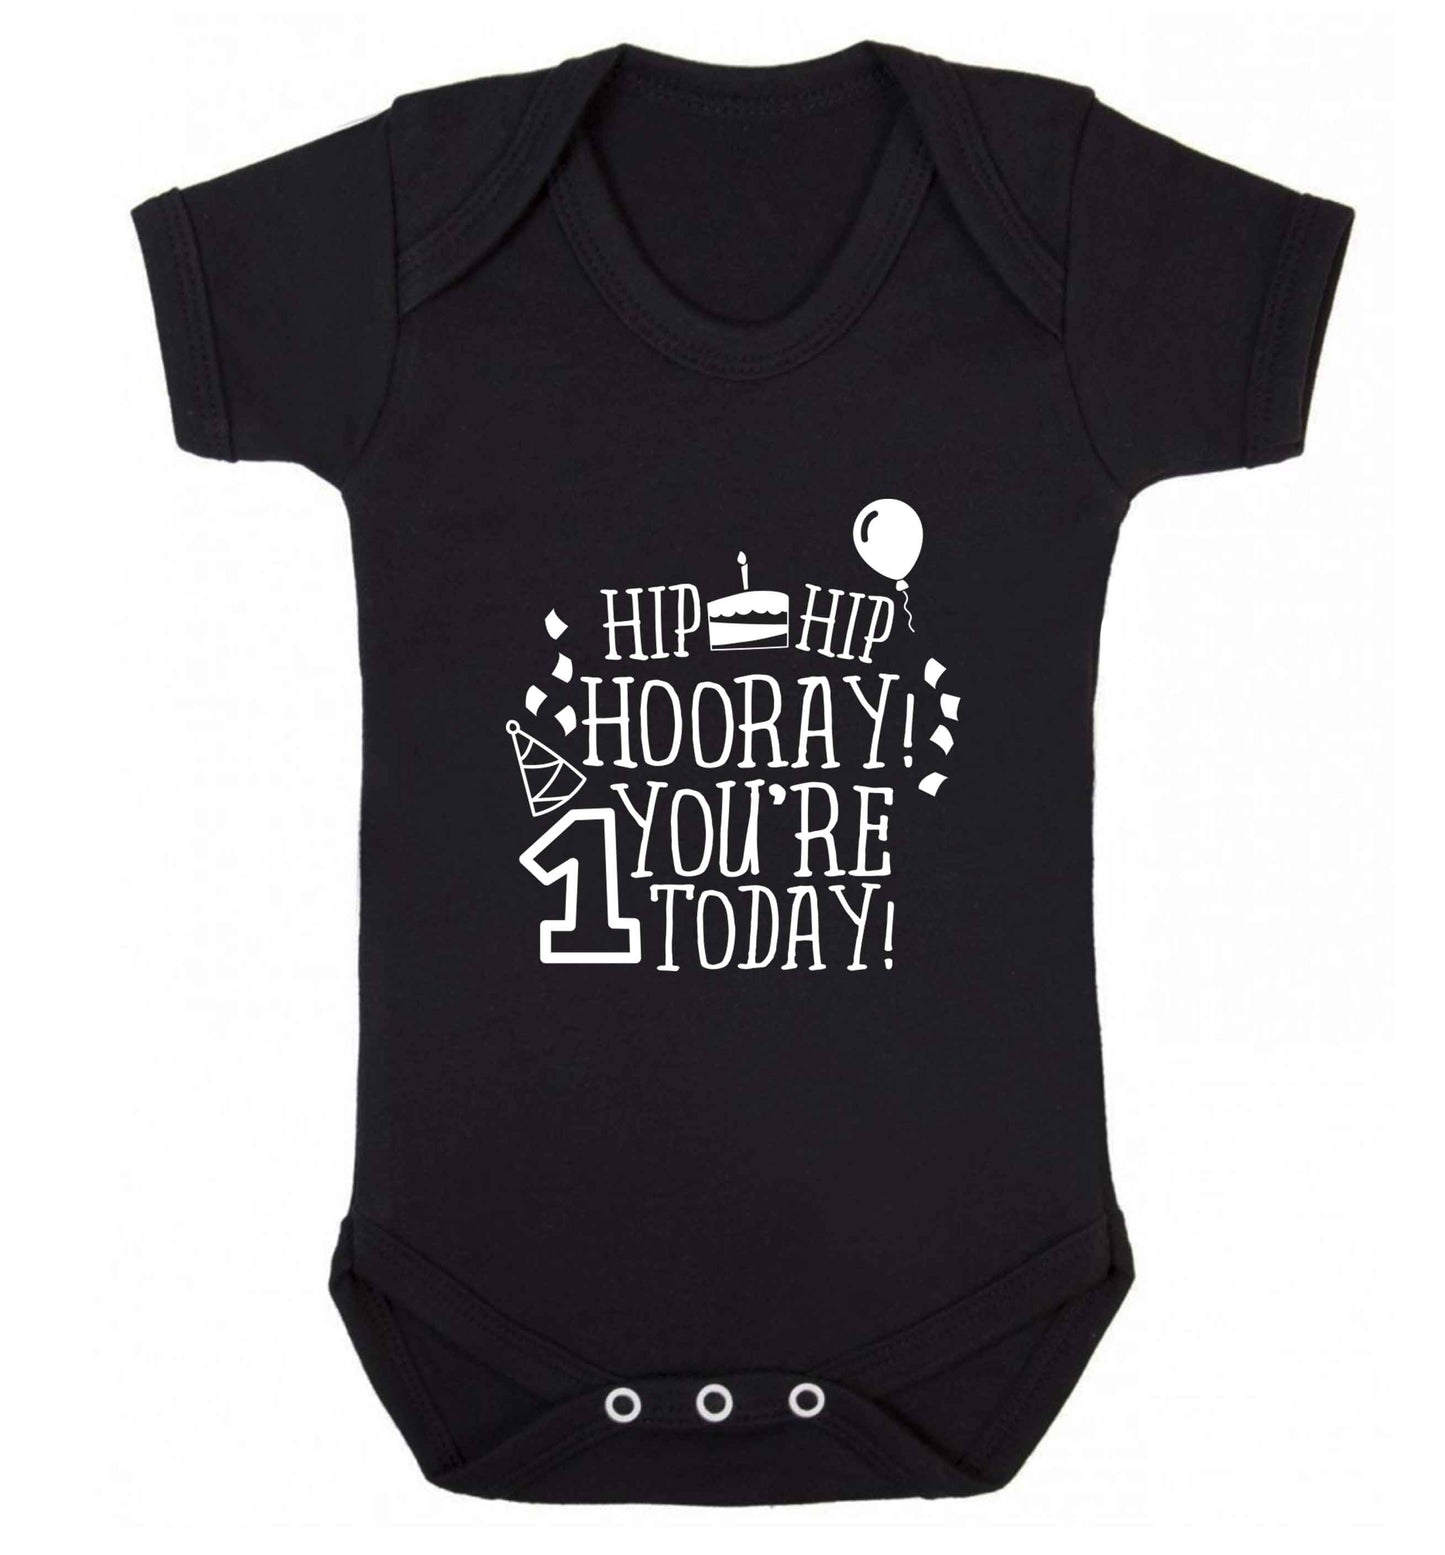 You're one today baby vest black 18-24 months